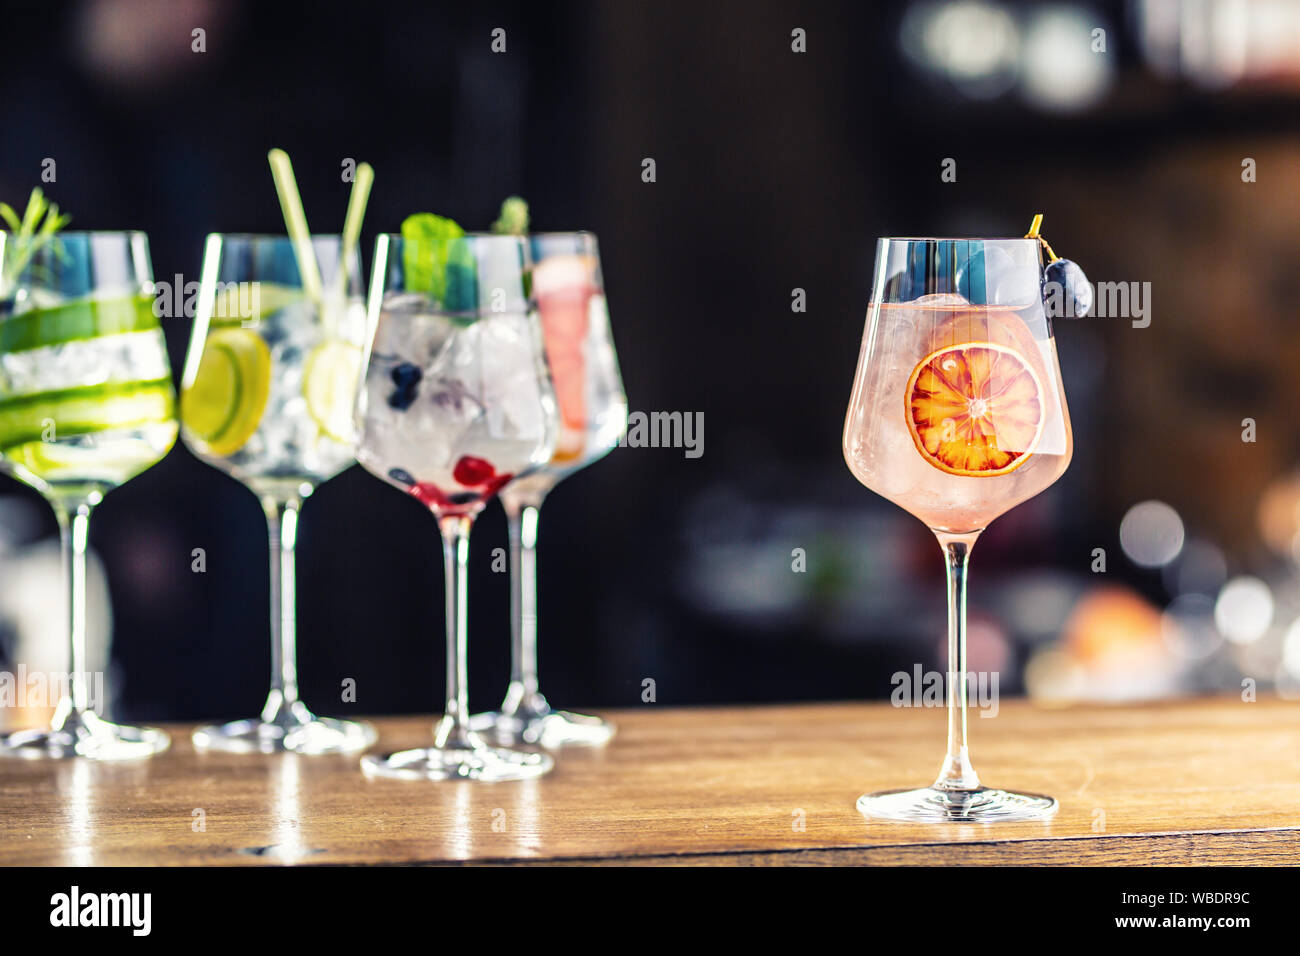 Gin tonic cocktails in wine glasses on bar counter in pup or restaurant Stock Photo